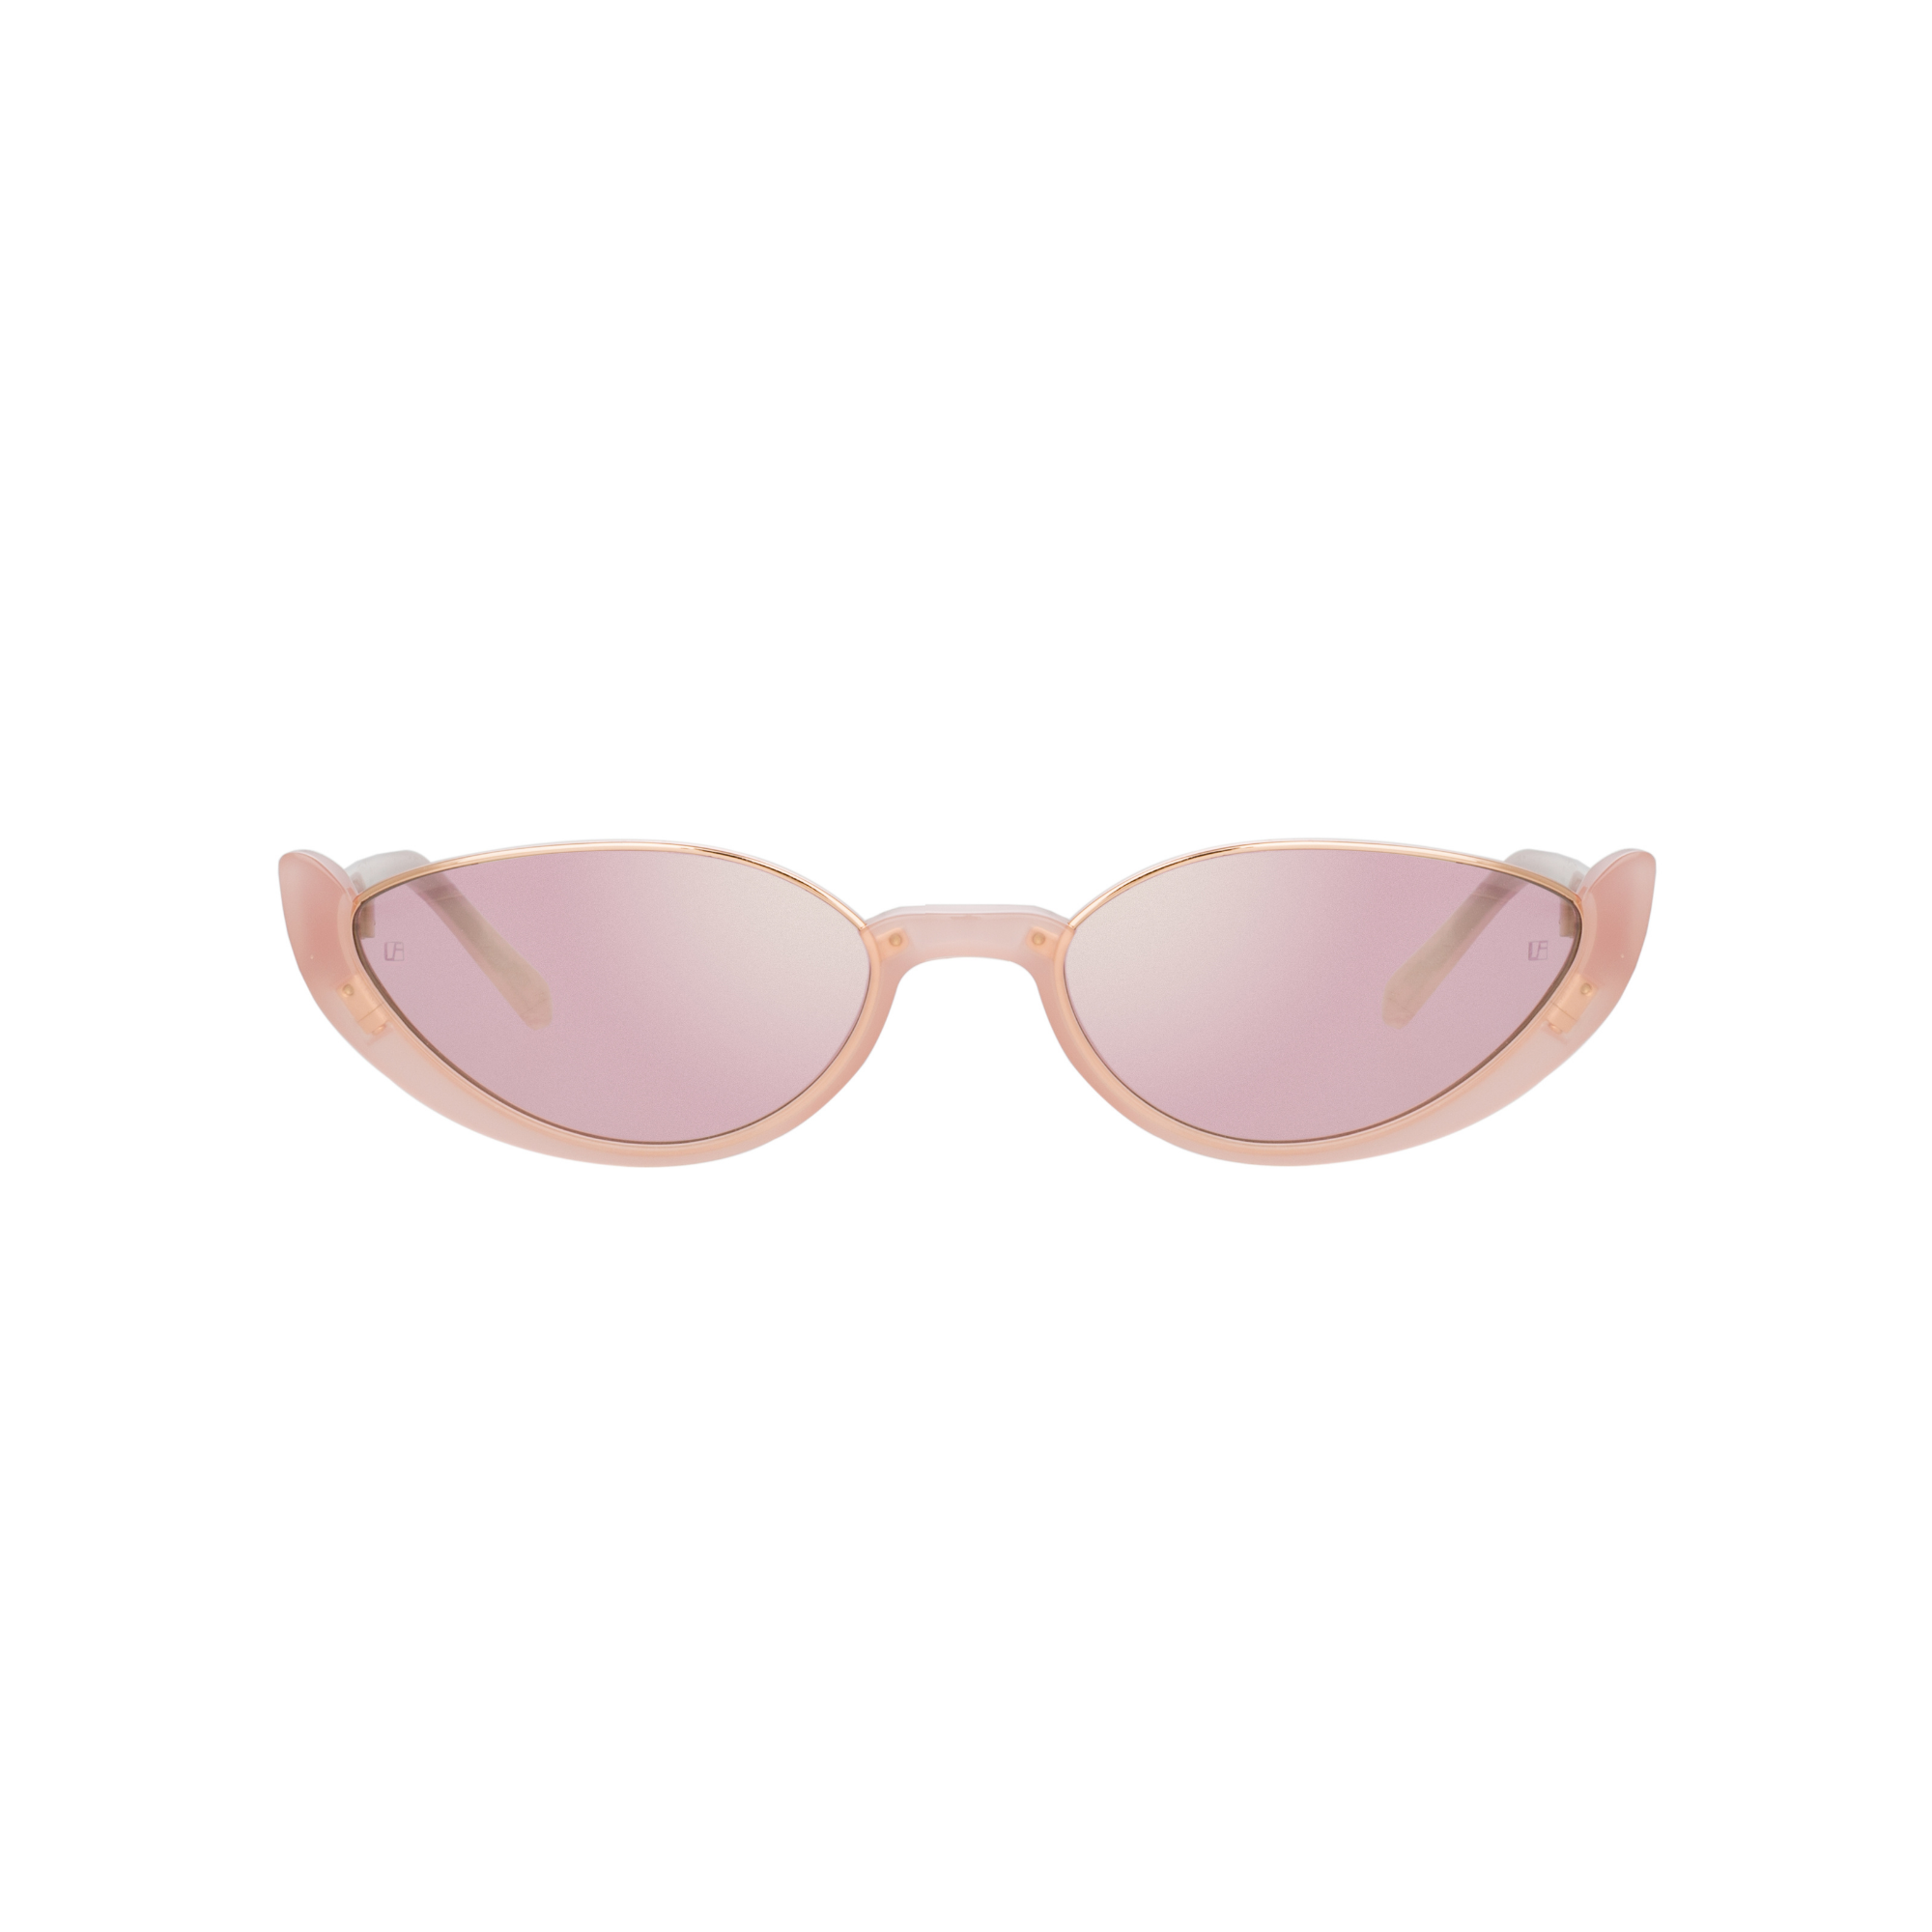 Ralph & Russo Robyn Cat Eye Sunglasses in Pink